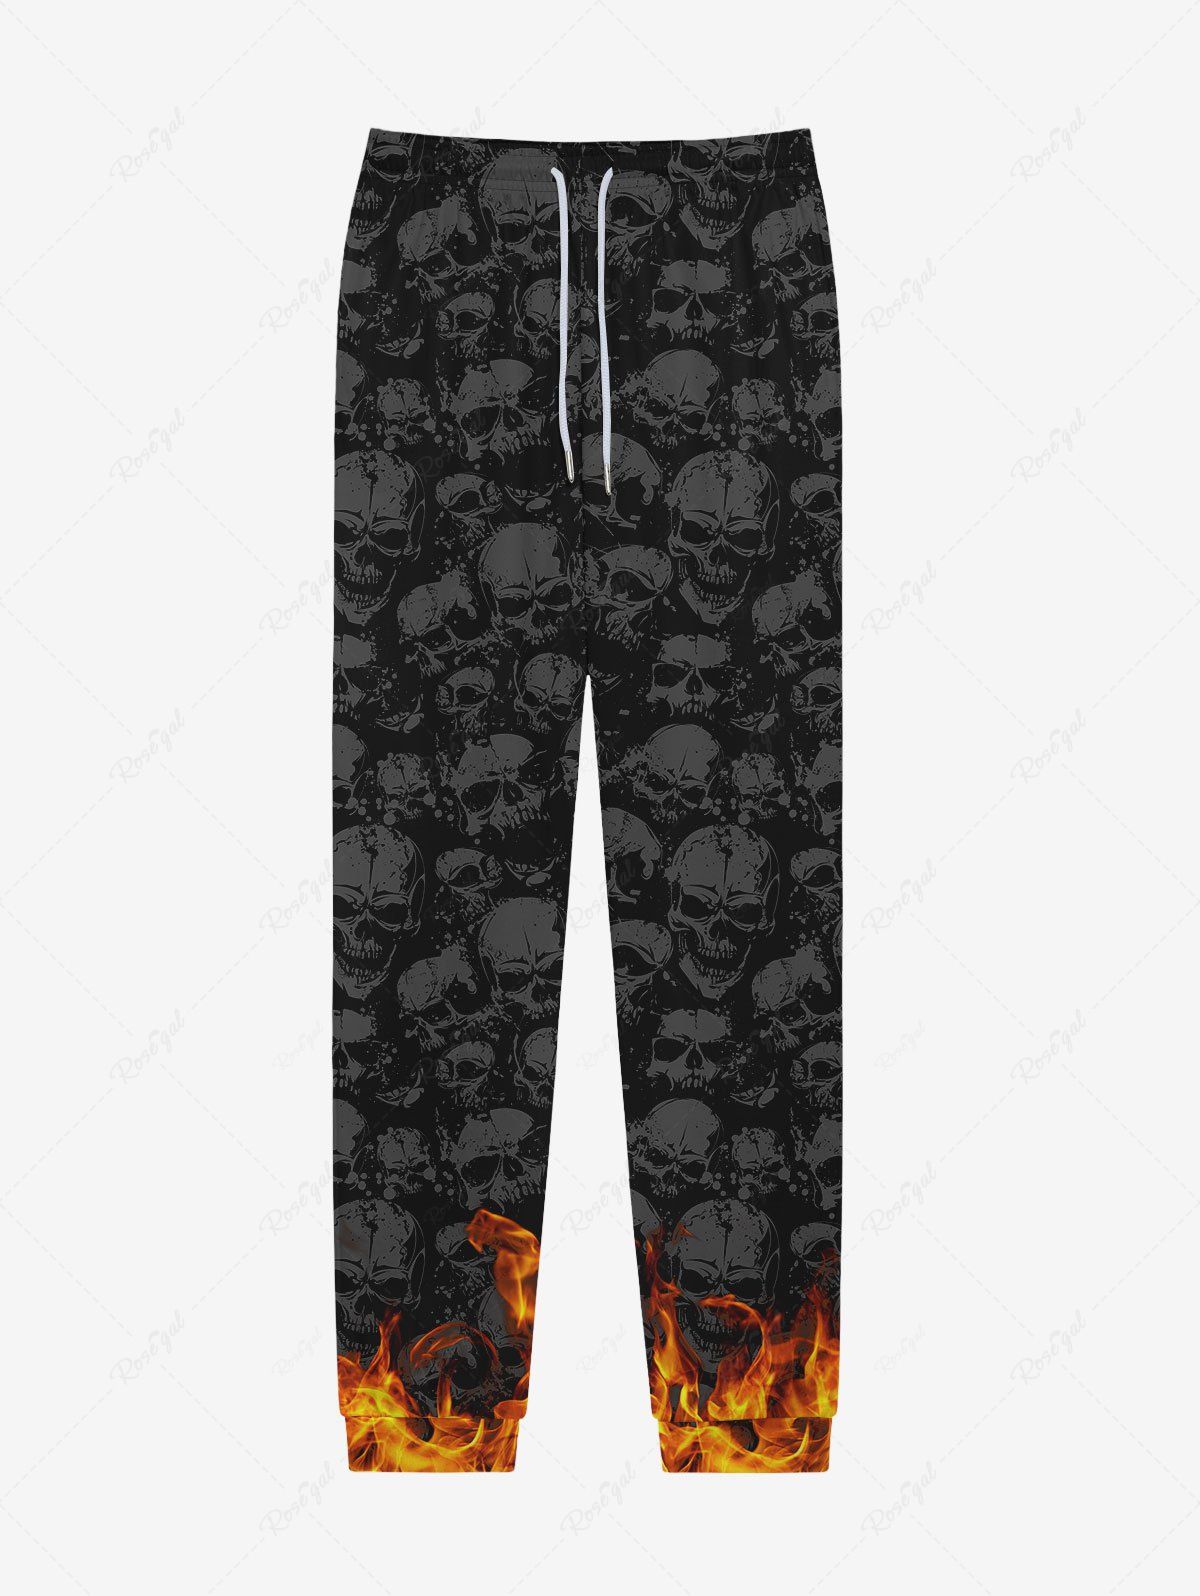 Outfit Gothic Distressed Skulls Fire Flame Print Pocket Drawstring Sweatpants For Men  